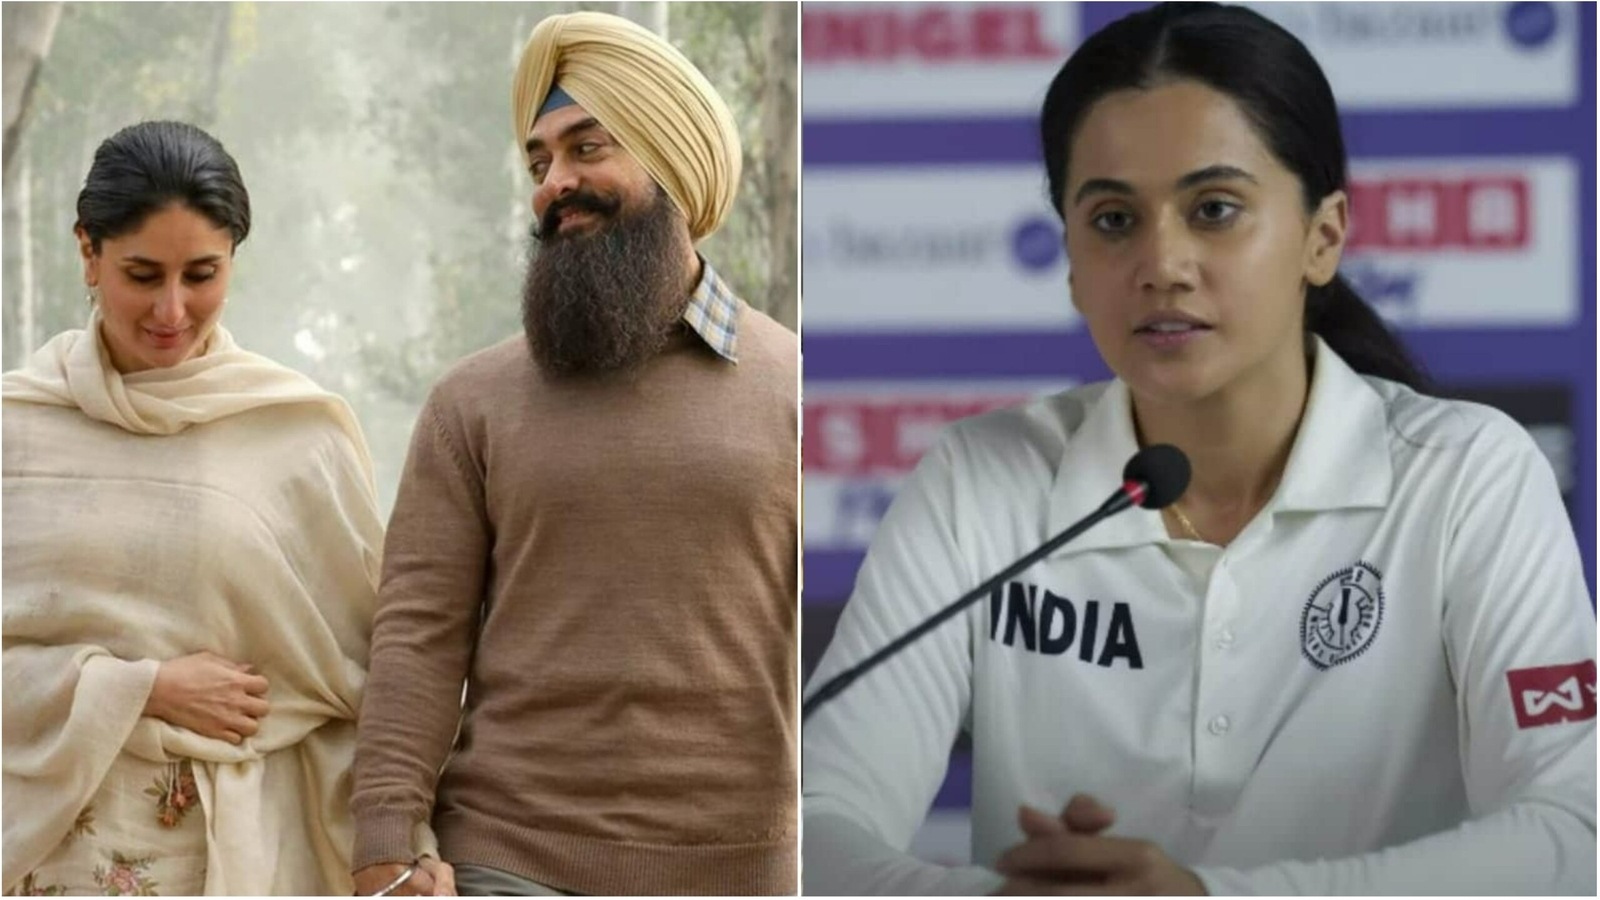 Aamir Khan’s Laal Singh Chaddha, Taapsee Pannu’s Shabaash Mithu face complaint for ‘ridiculing’ differently-abled people